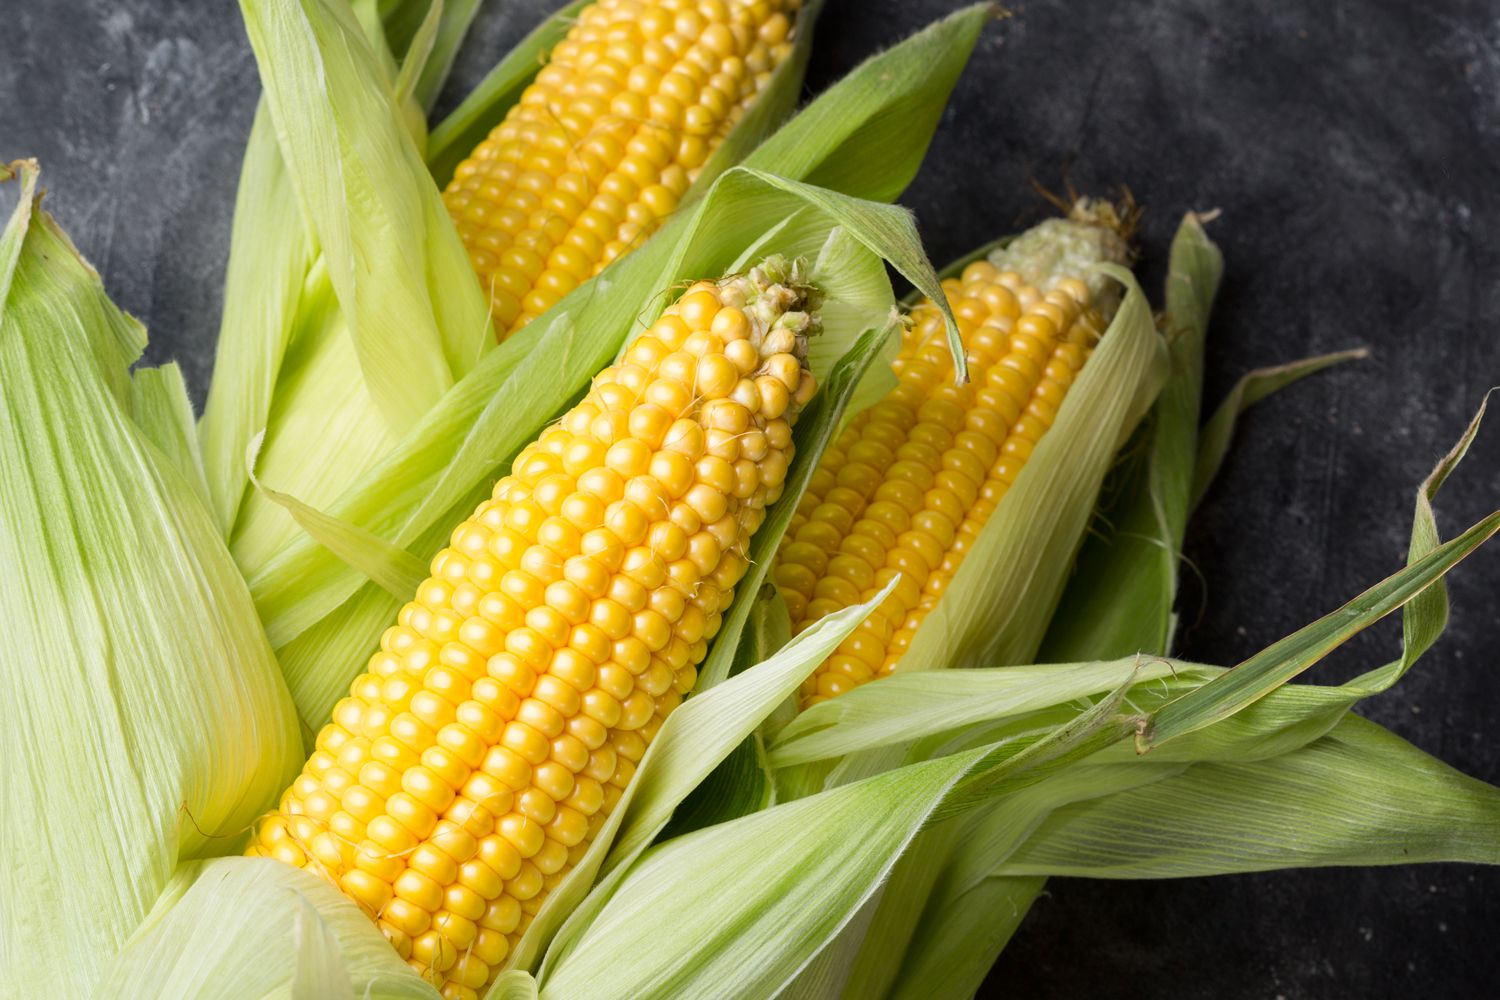 How To Store Corn After Harvest